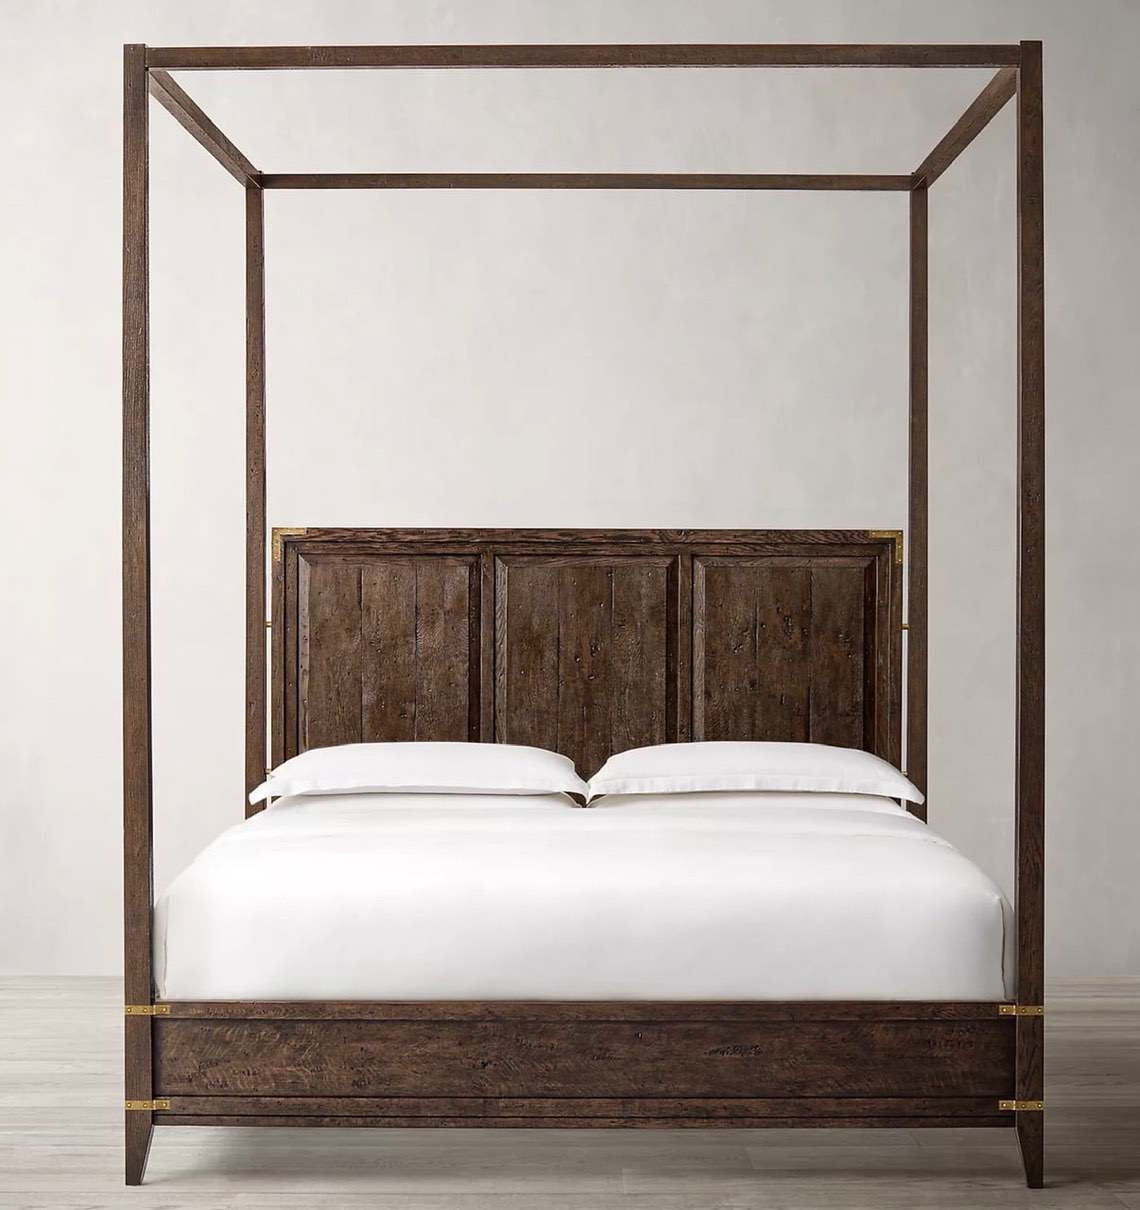 Made to Order Bedroom Furniture. - Four Poster 041-01